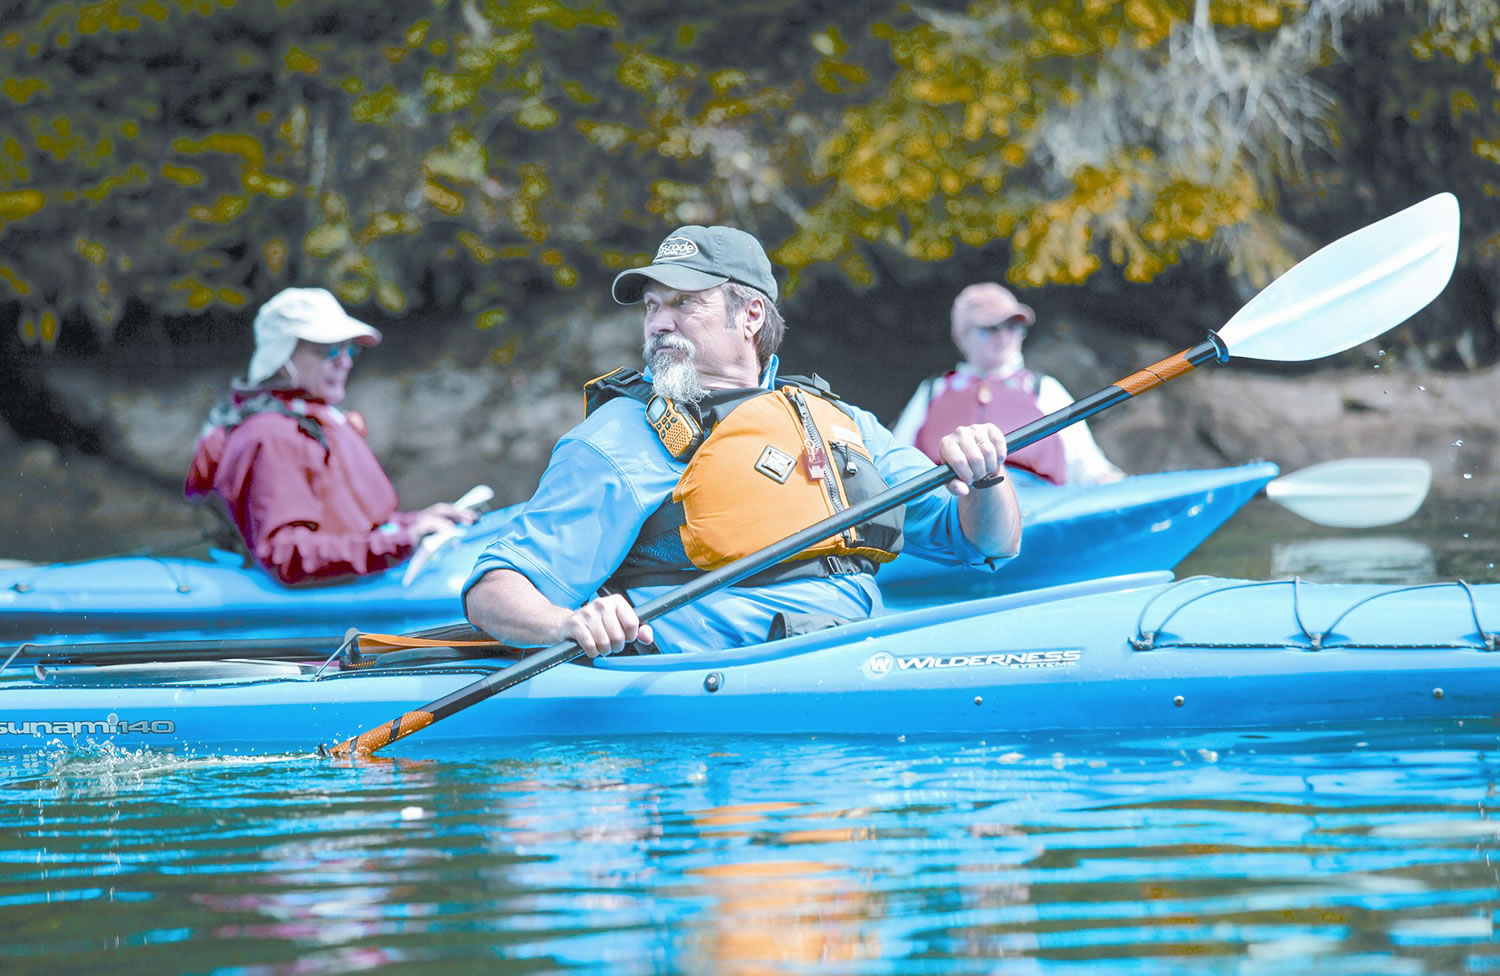 Bob Appling keeps track of members of the group as they paddle out of Cresap Bay on Lake Merwin.